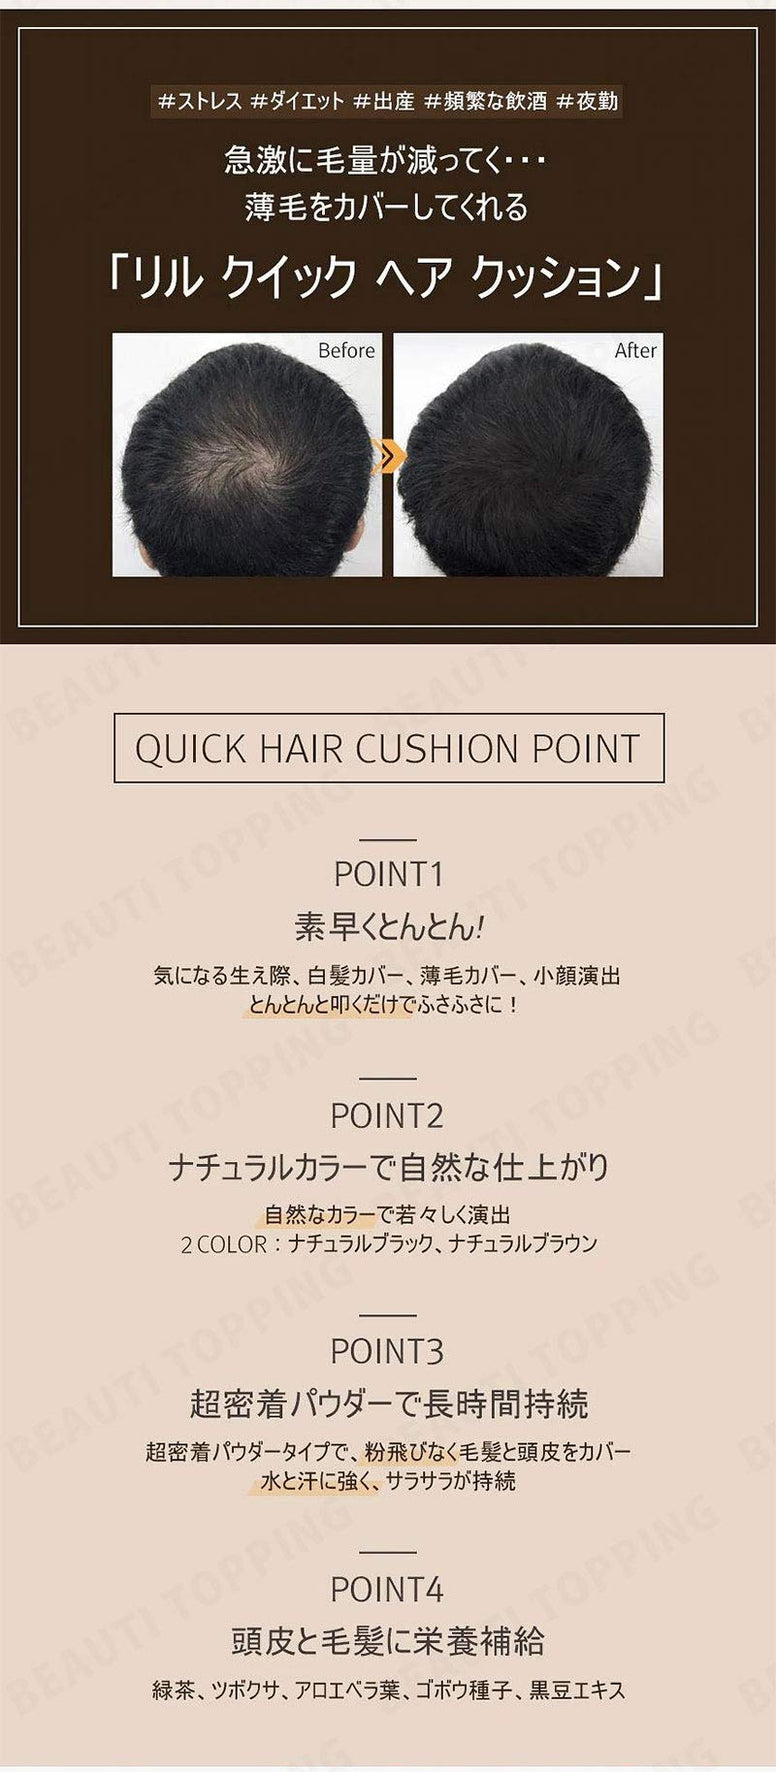 RiRe Quick Hair Instant Touch-up Cushion 14g / 0.49 oz. Cover Grey Hair, Portable Size (Natural Black)